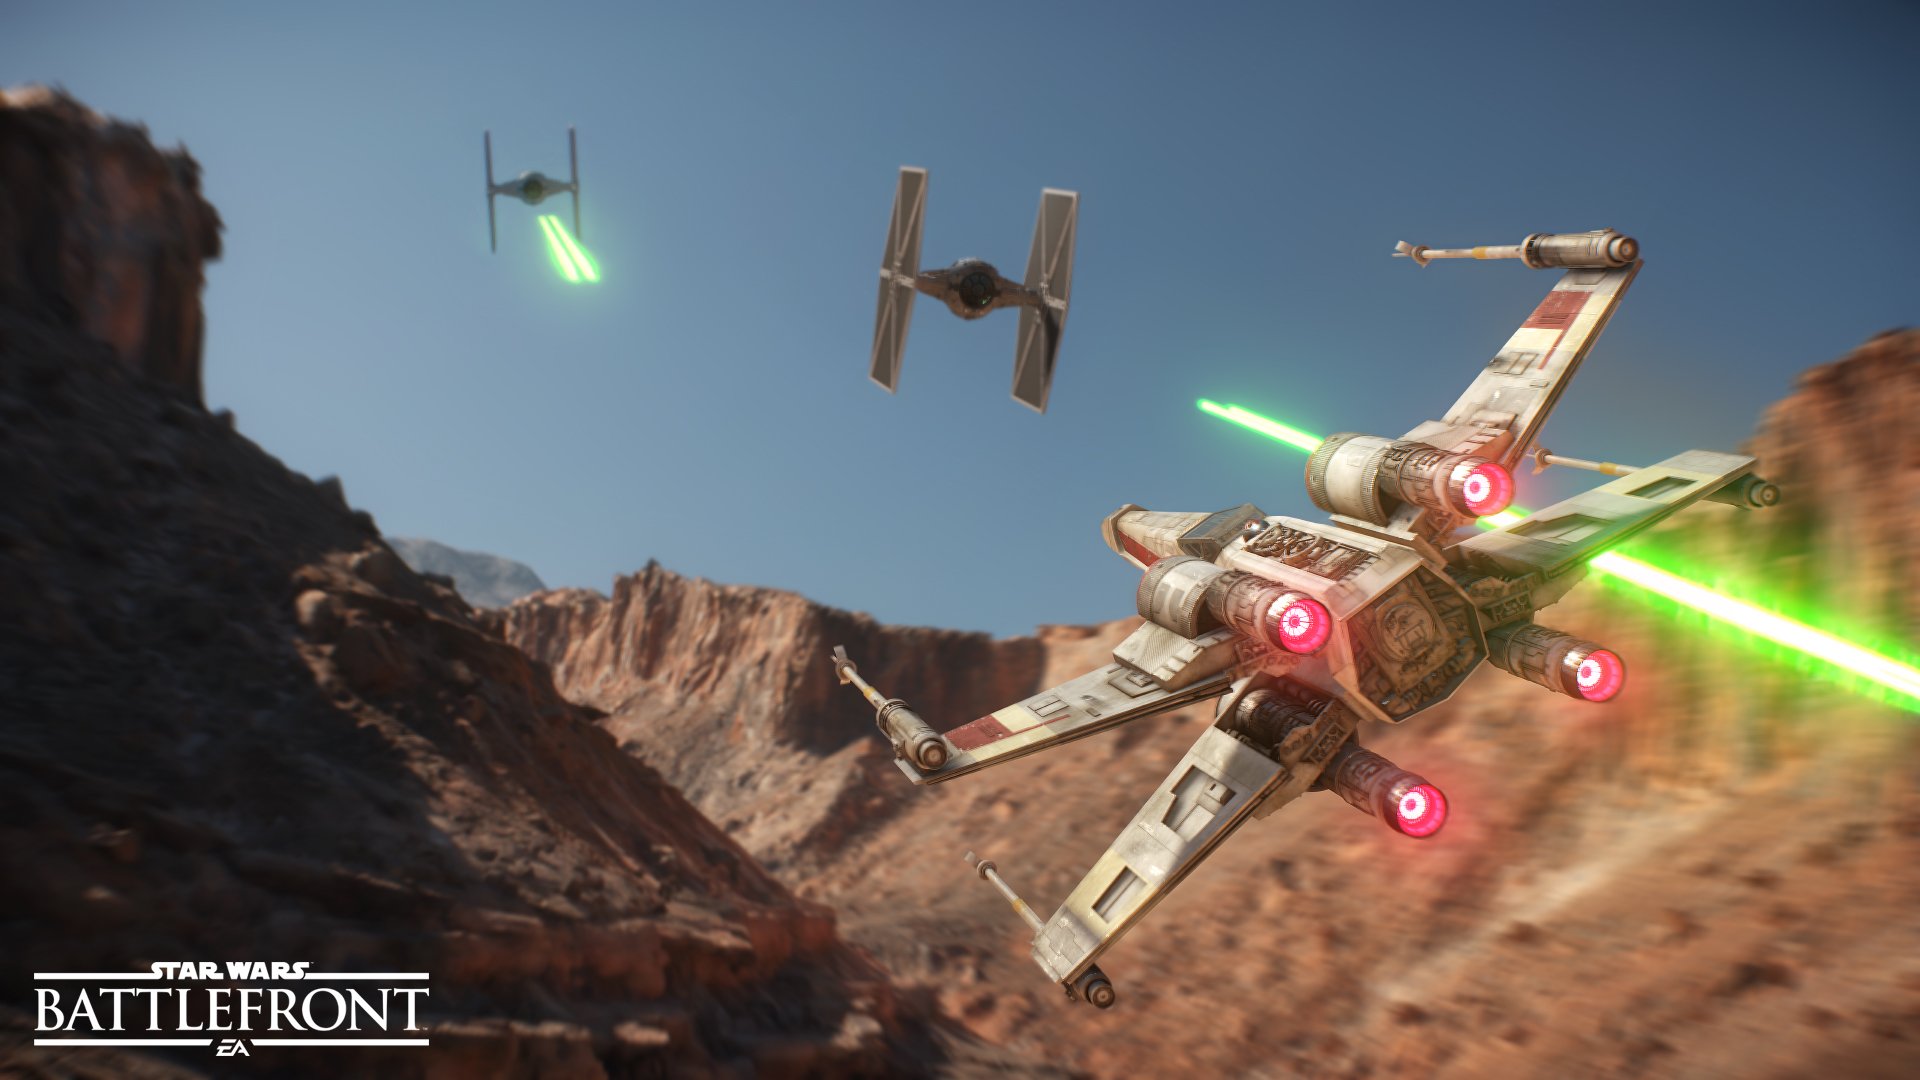 Star Wars Battlefront Ps4 Screenshots Look Red Hoth Push Square